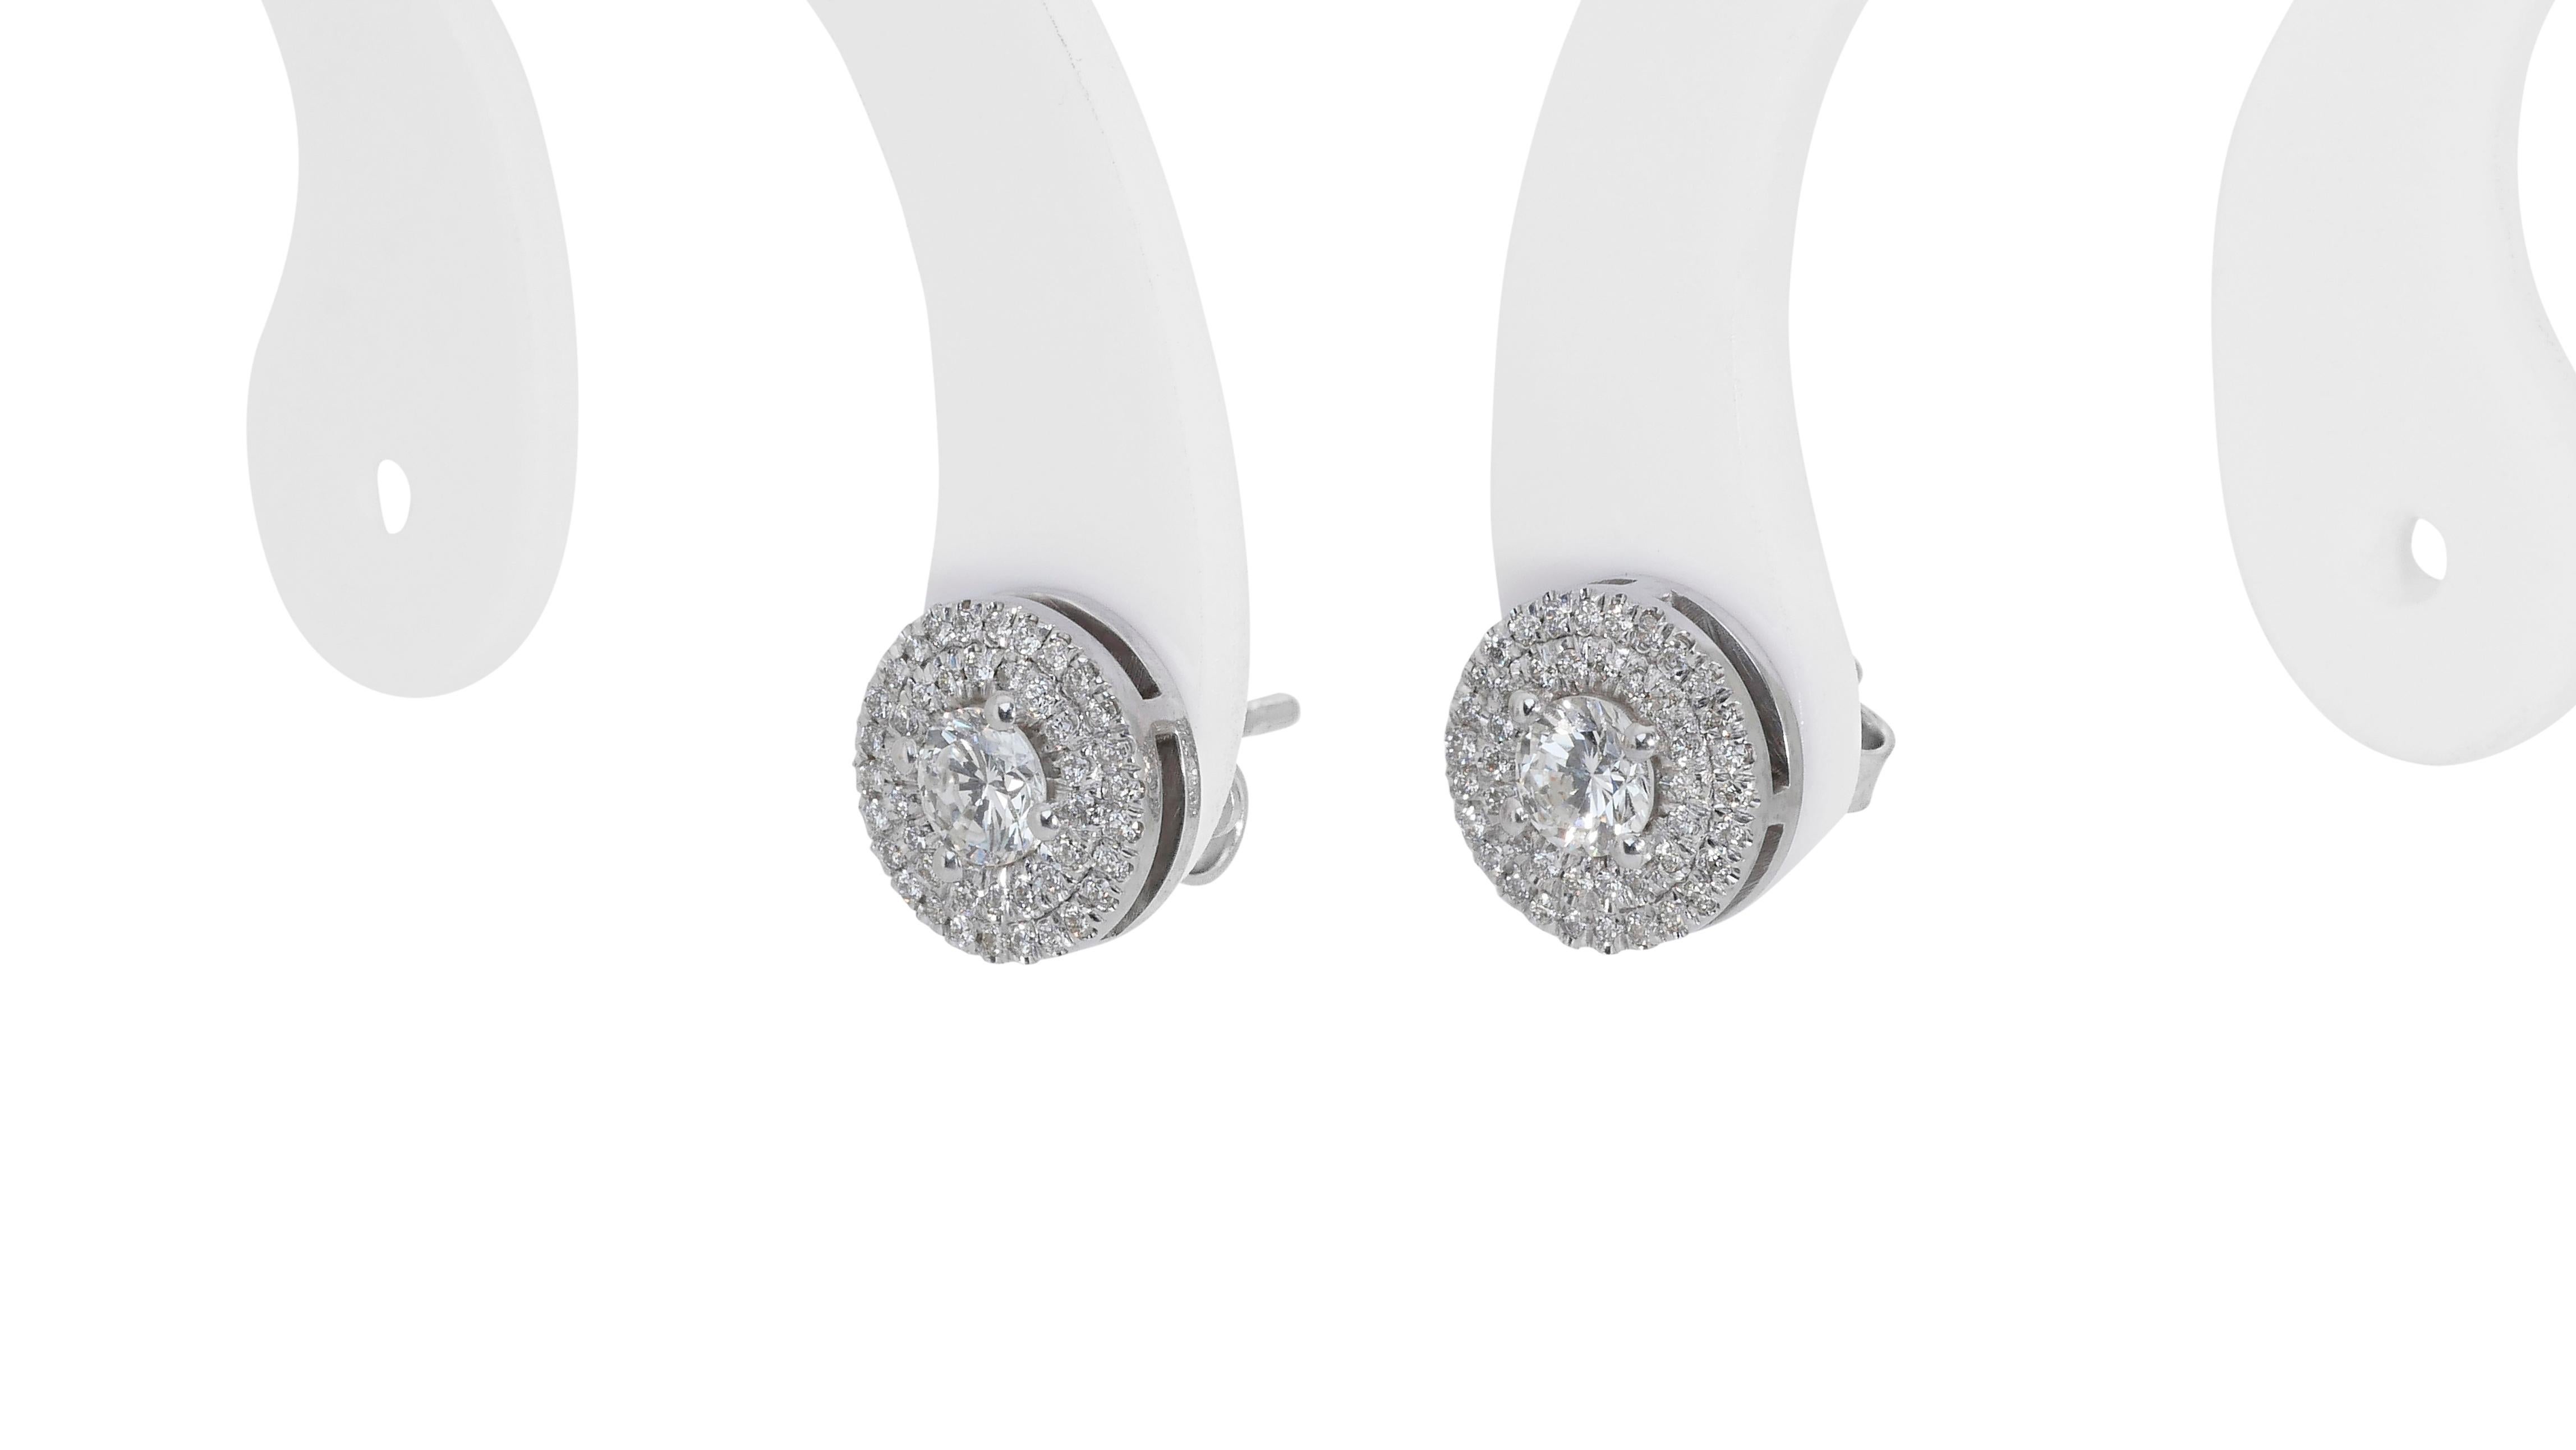 Radiant 1.20ct Diamonds Halo Stud Earrings in 18k White Gold - GIA Certified In New Condition For Sale In רמת גן, IL